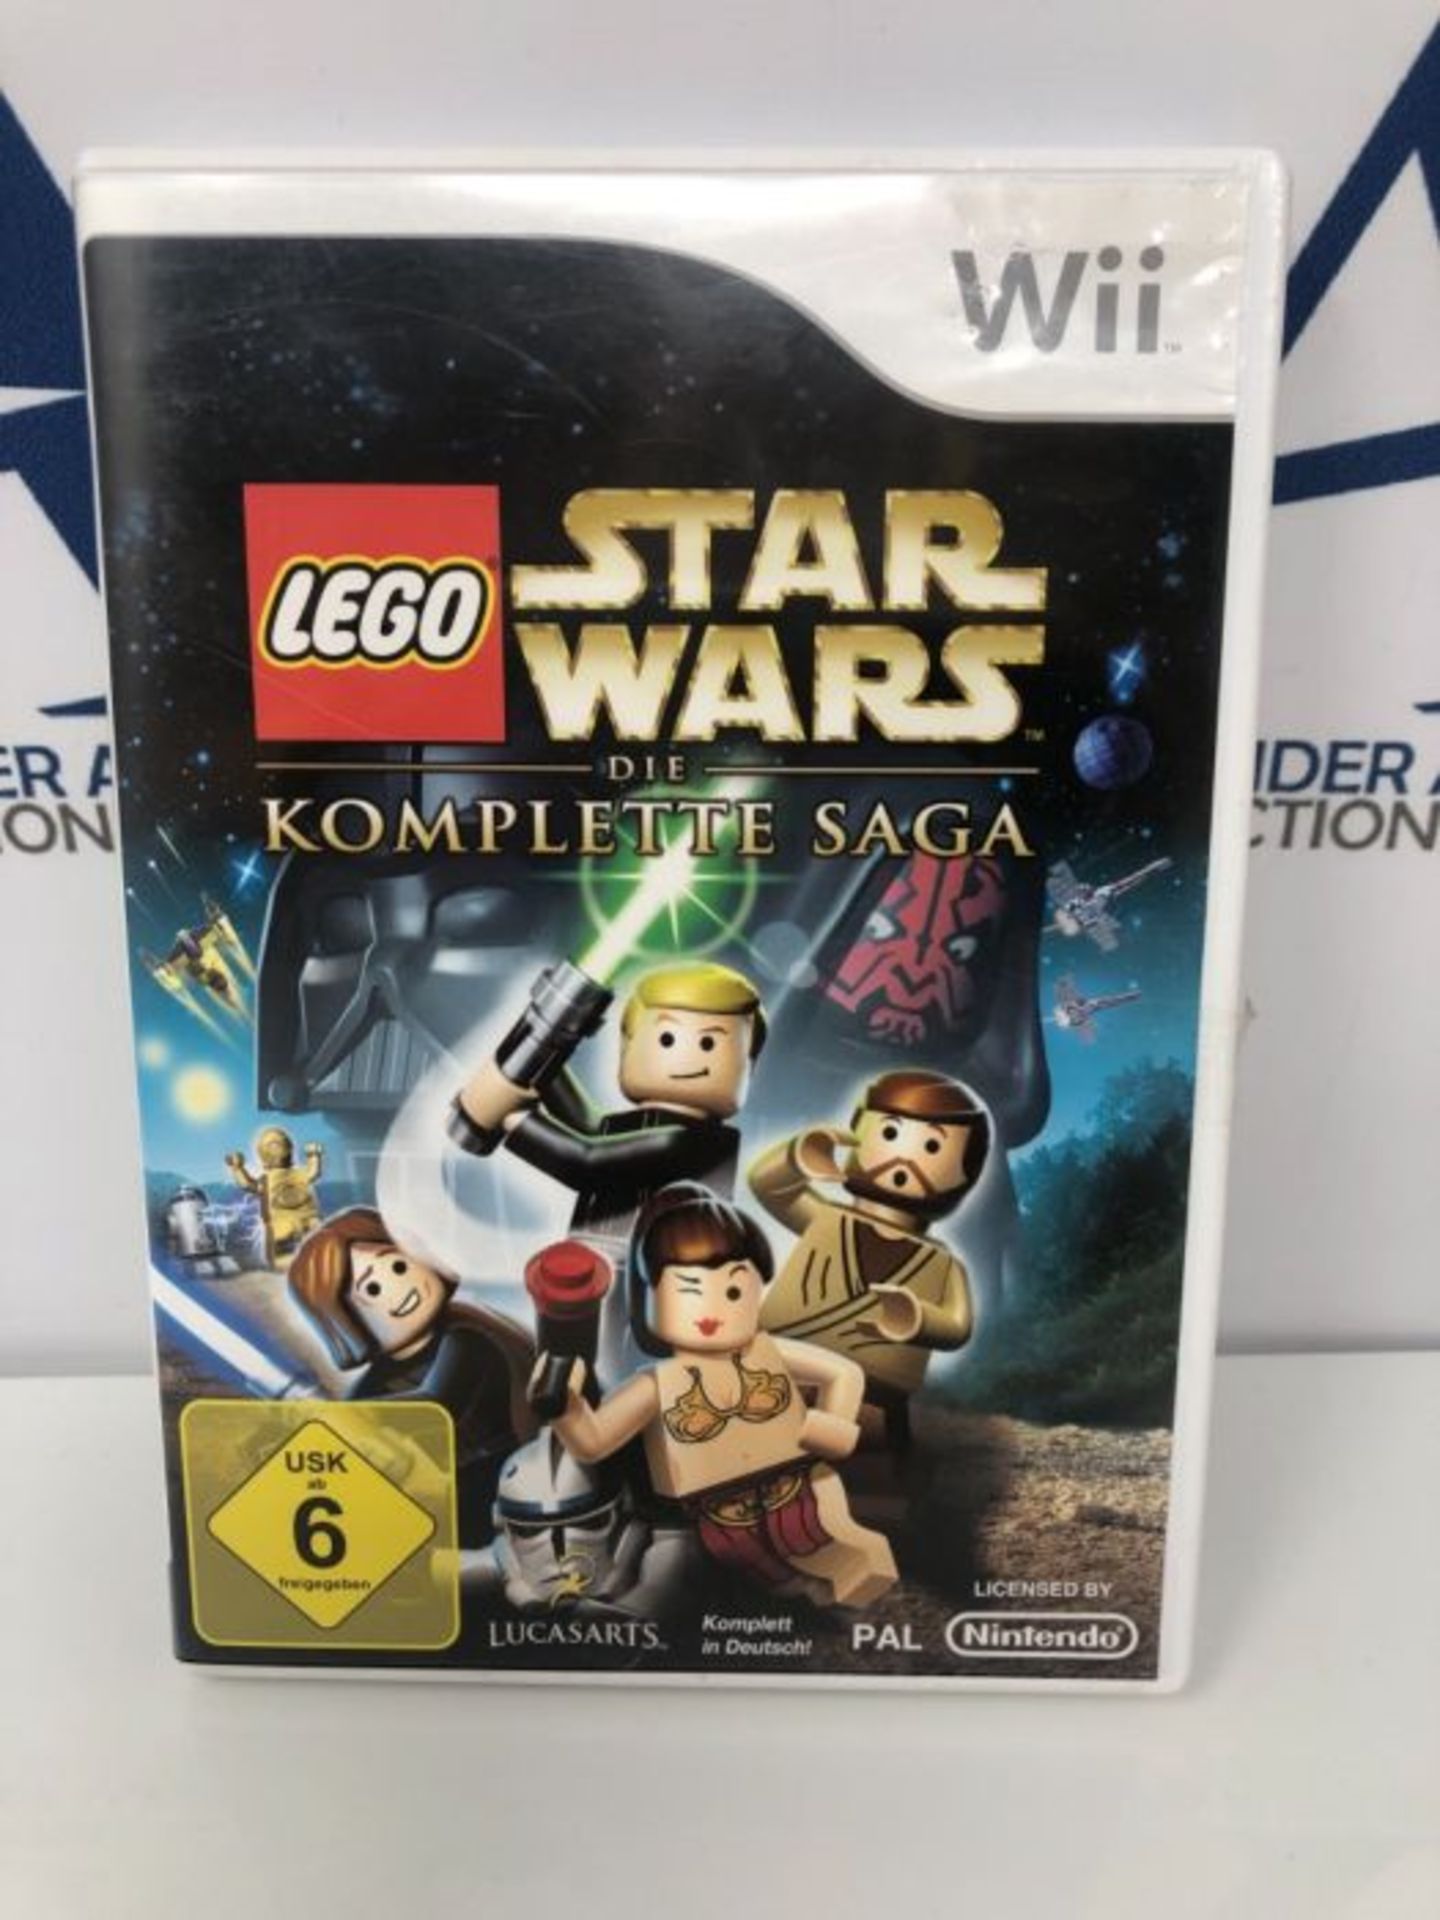 Software Pyramide Wii Lego Star Wars - Image 2 of 3